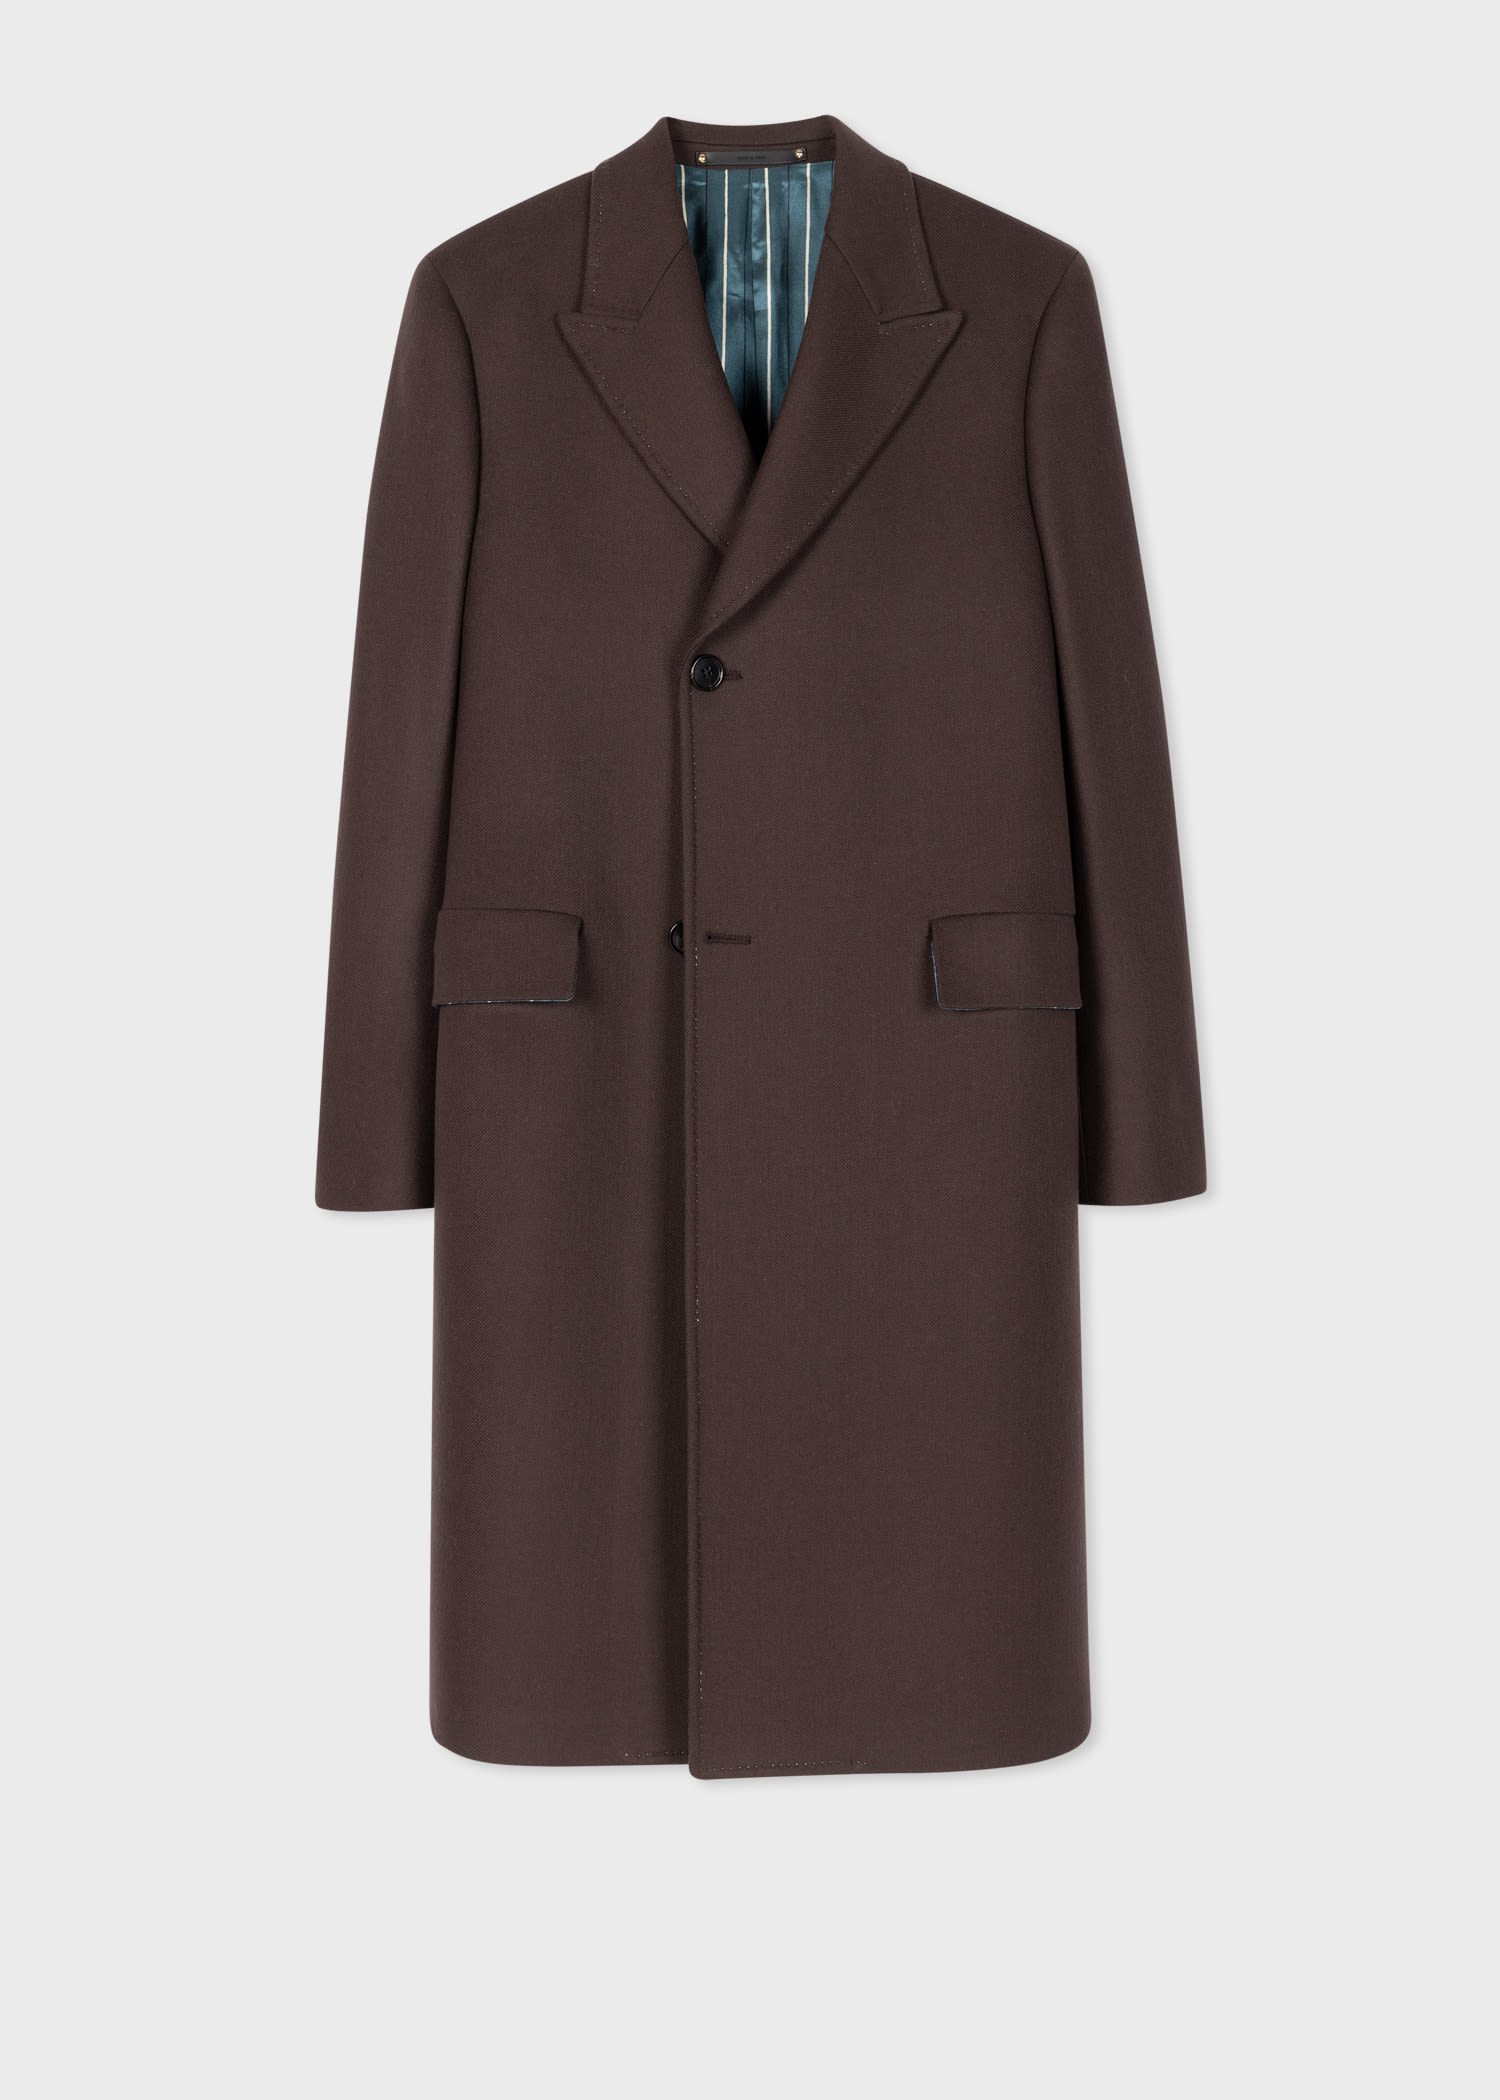 Paul Smith Double-Breasted Coat - Brown